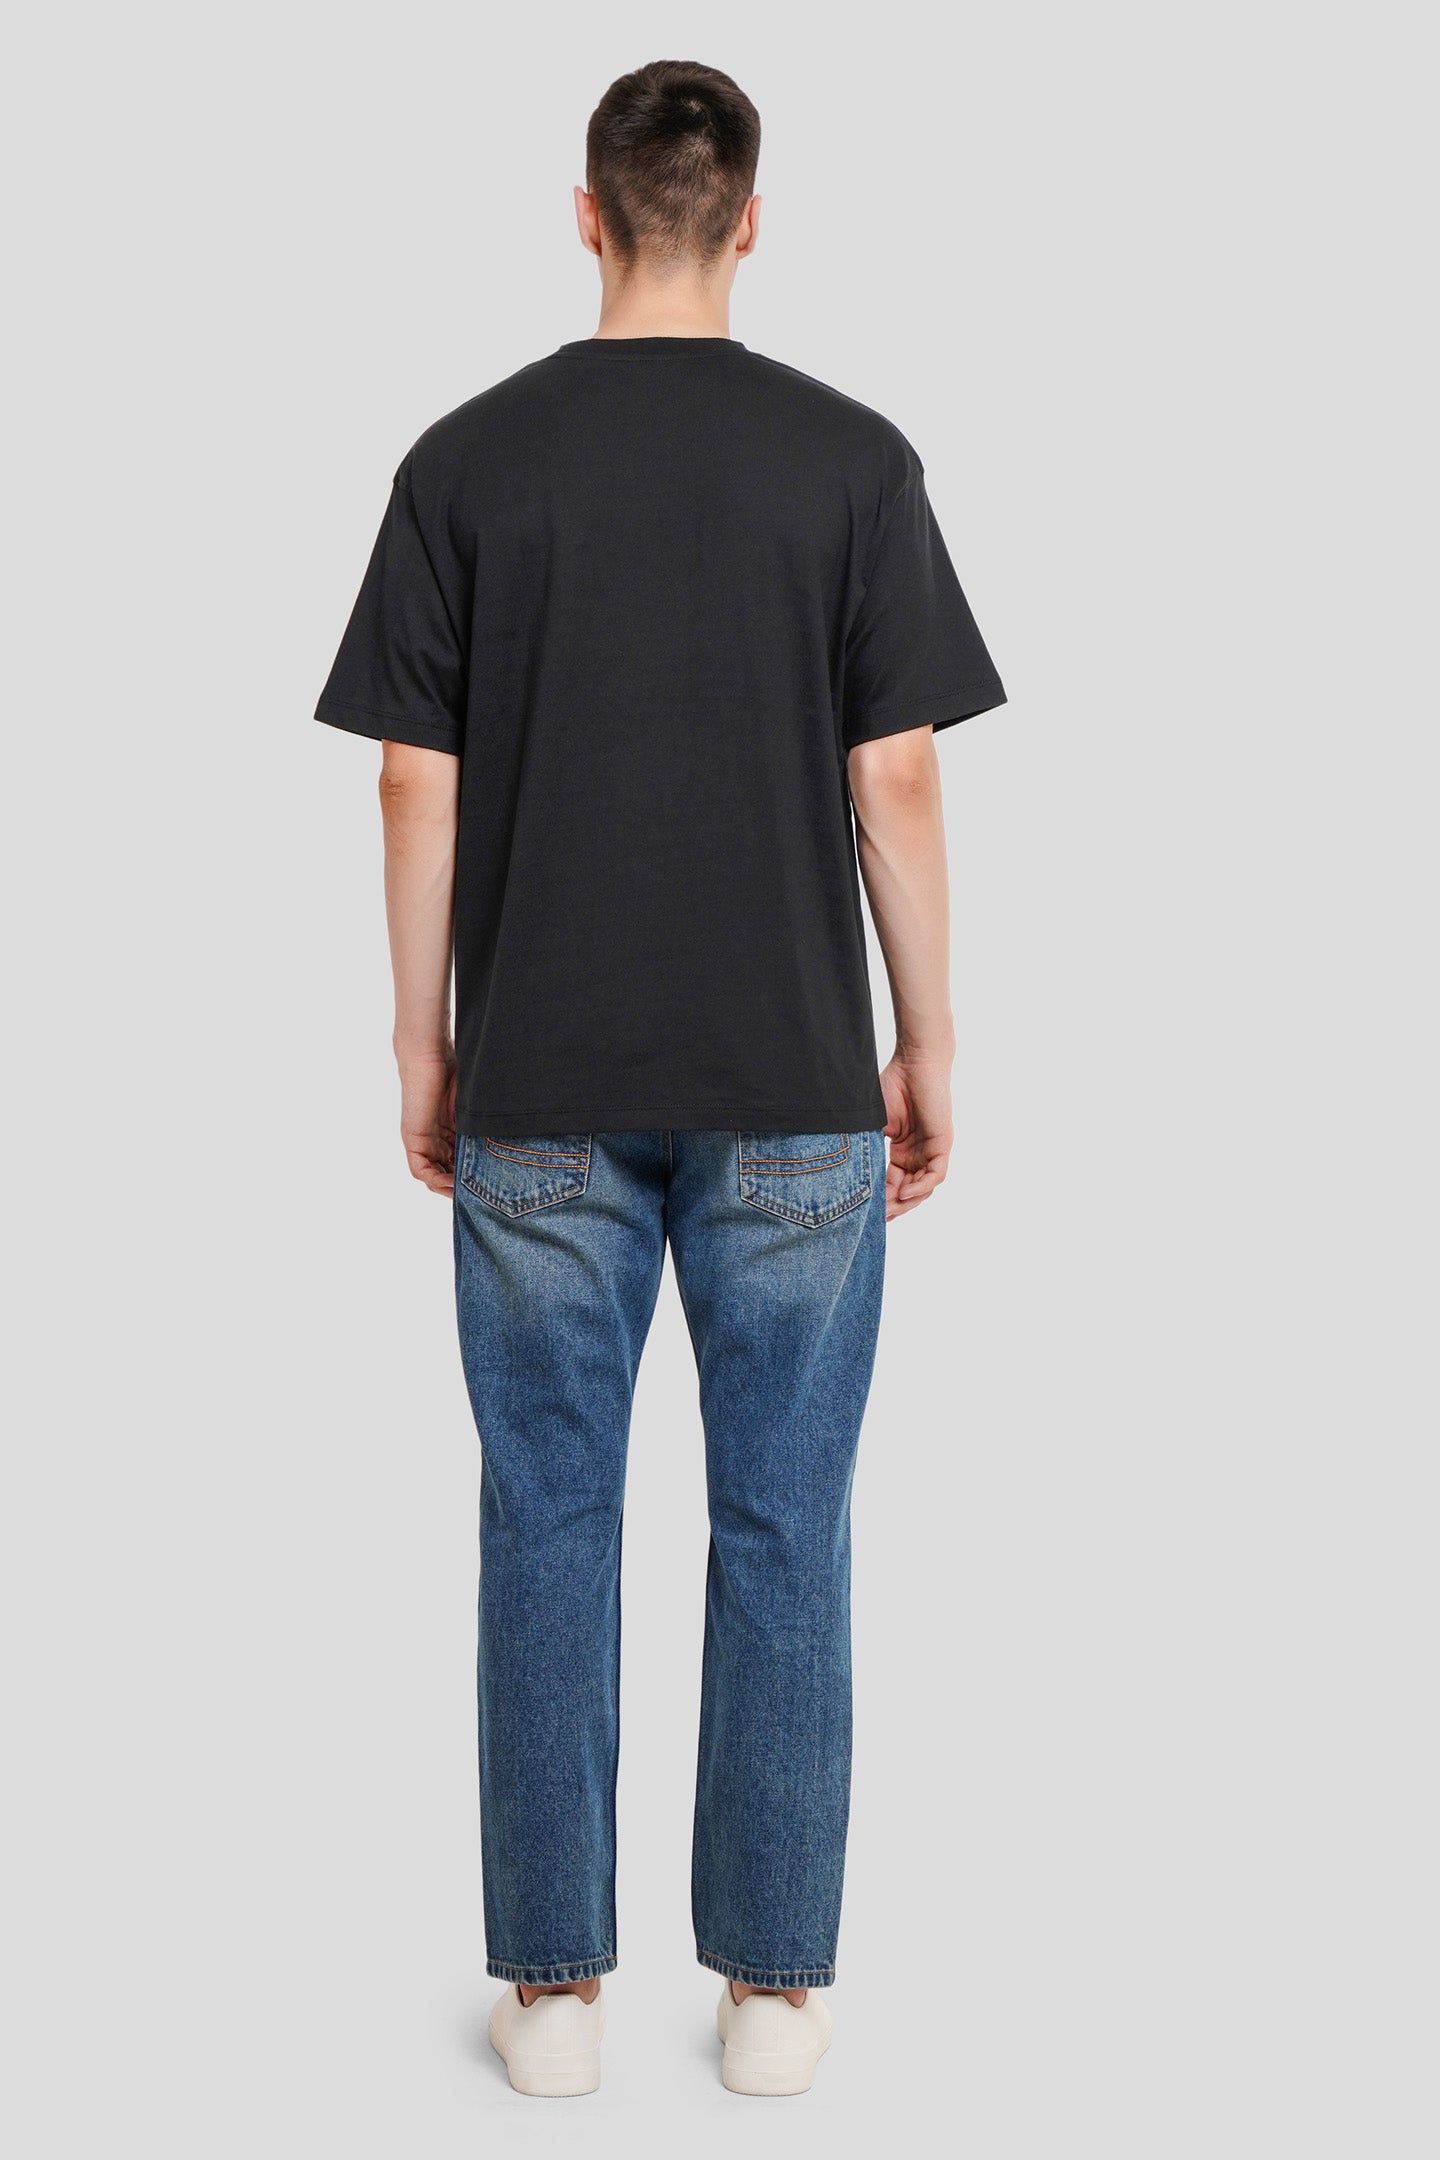 Another Day Another Dollar Black Printed T Shirt Men Oversized Fit With Front Design Pic 4